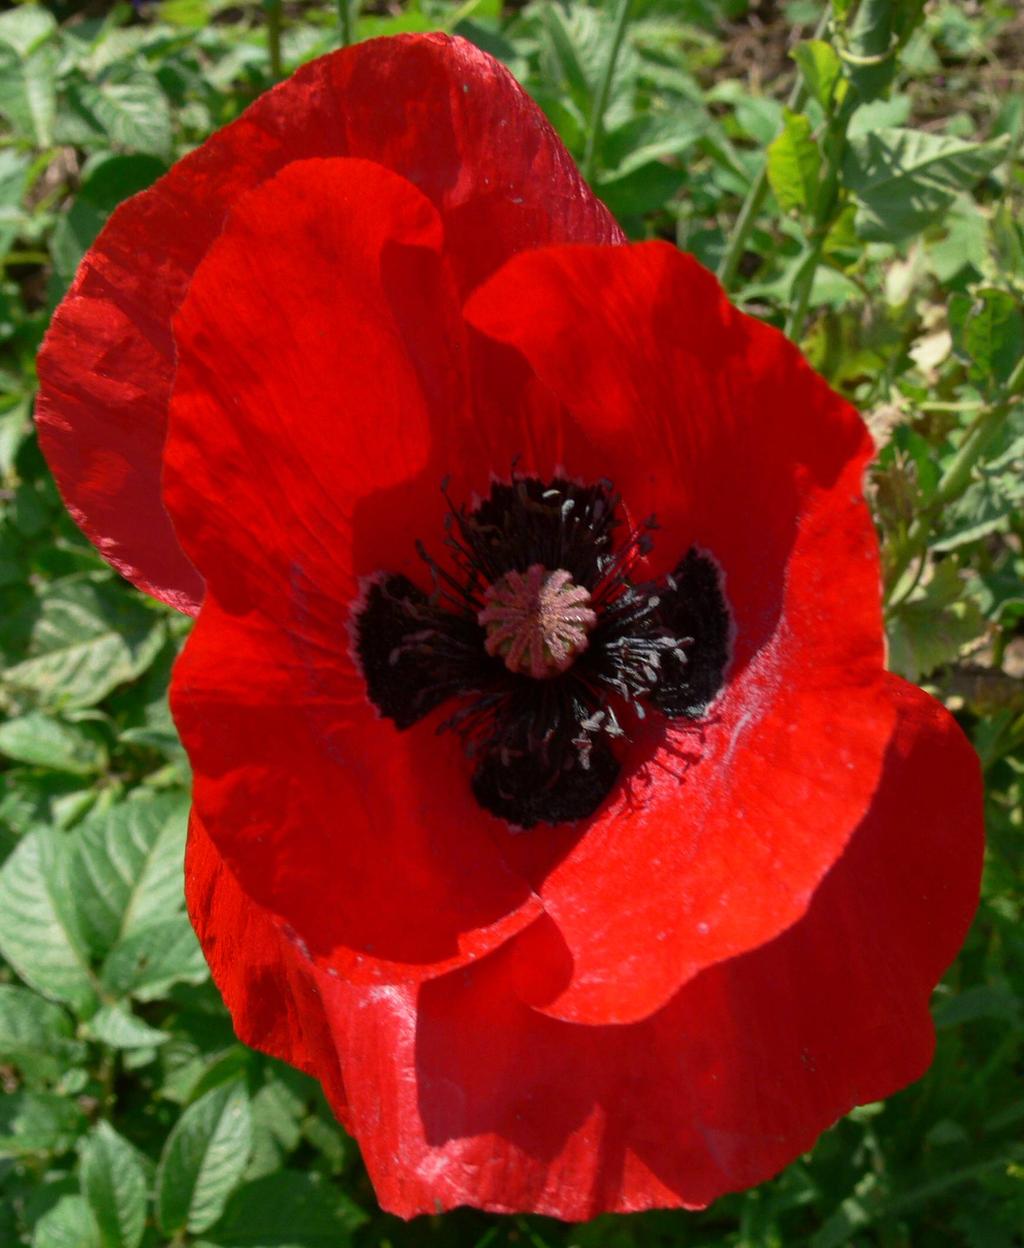 Poppy Plant Opium was known to ancient Greek and Roman physicians as a powerful